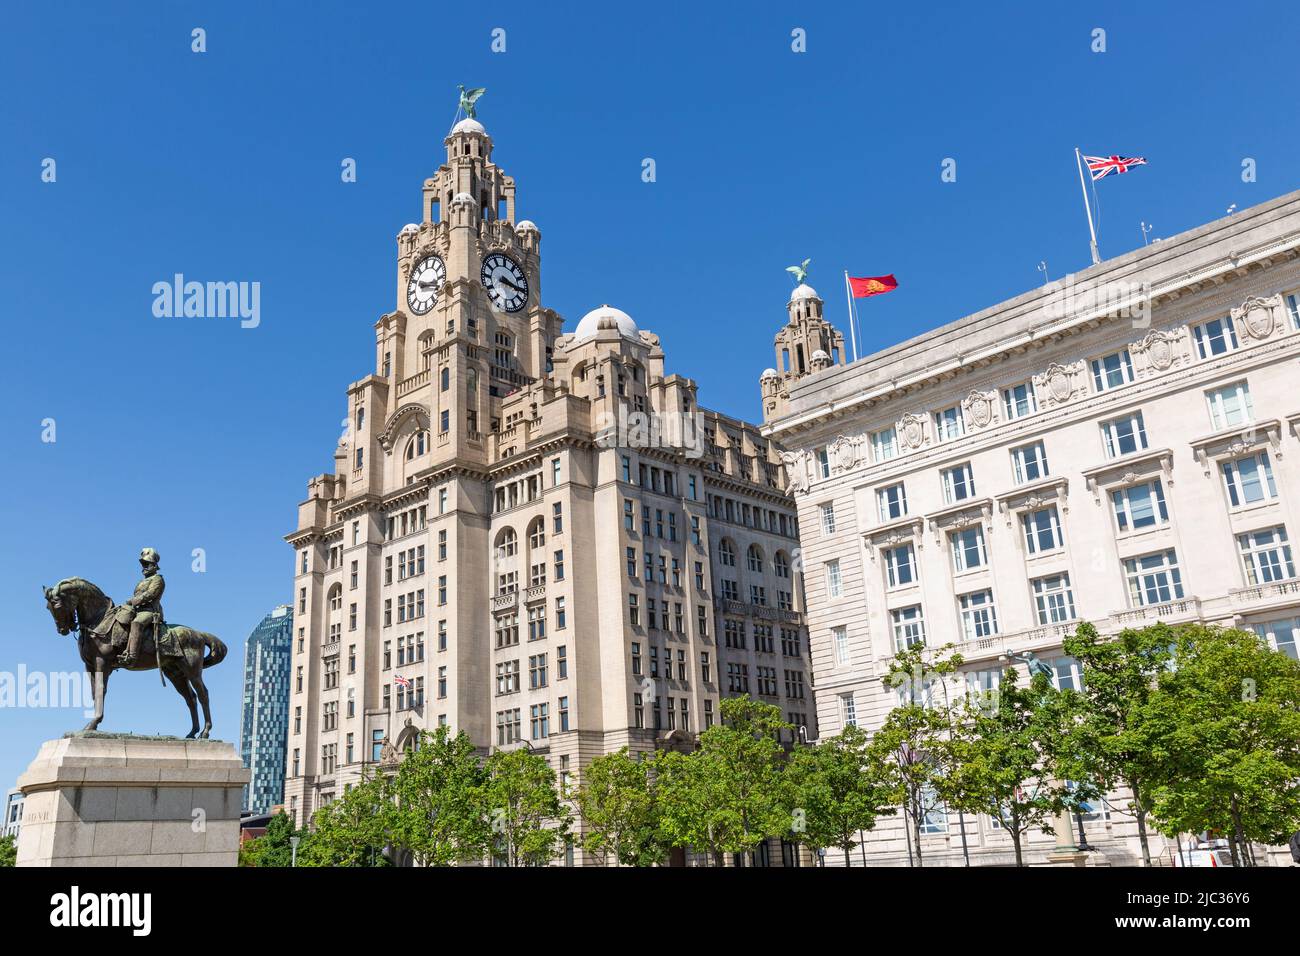 Statue of Edward VII, Royal Liver Building and Cunard Building, Pier Head, Liverpool, England, UK Stock Photo